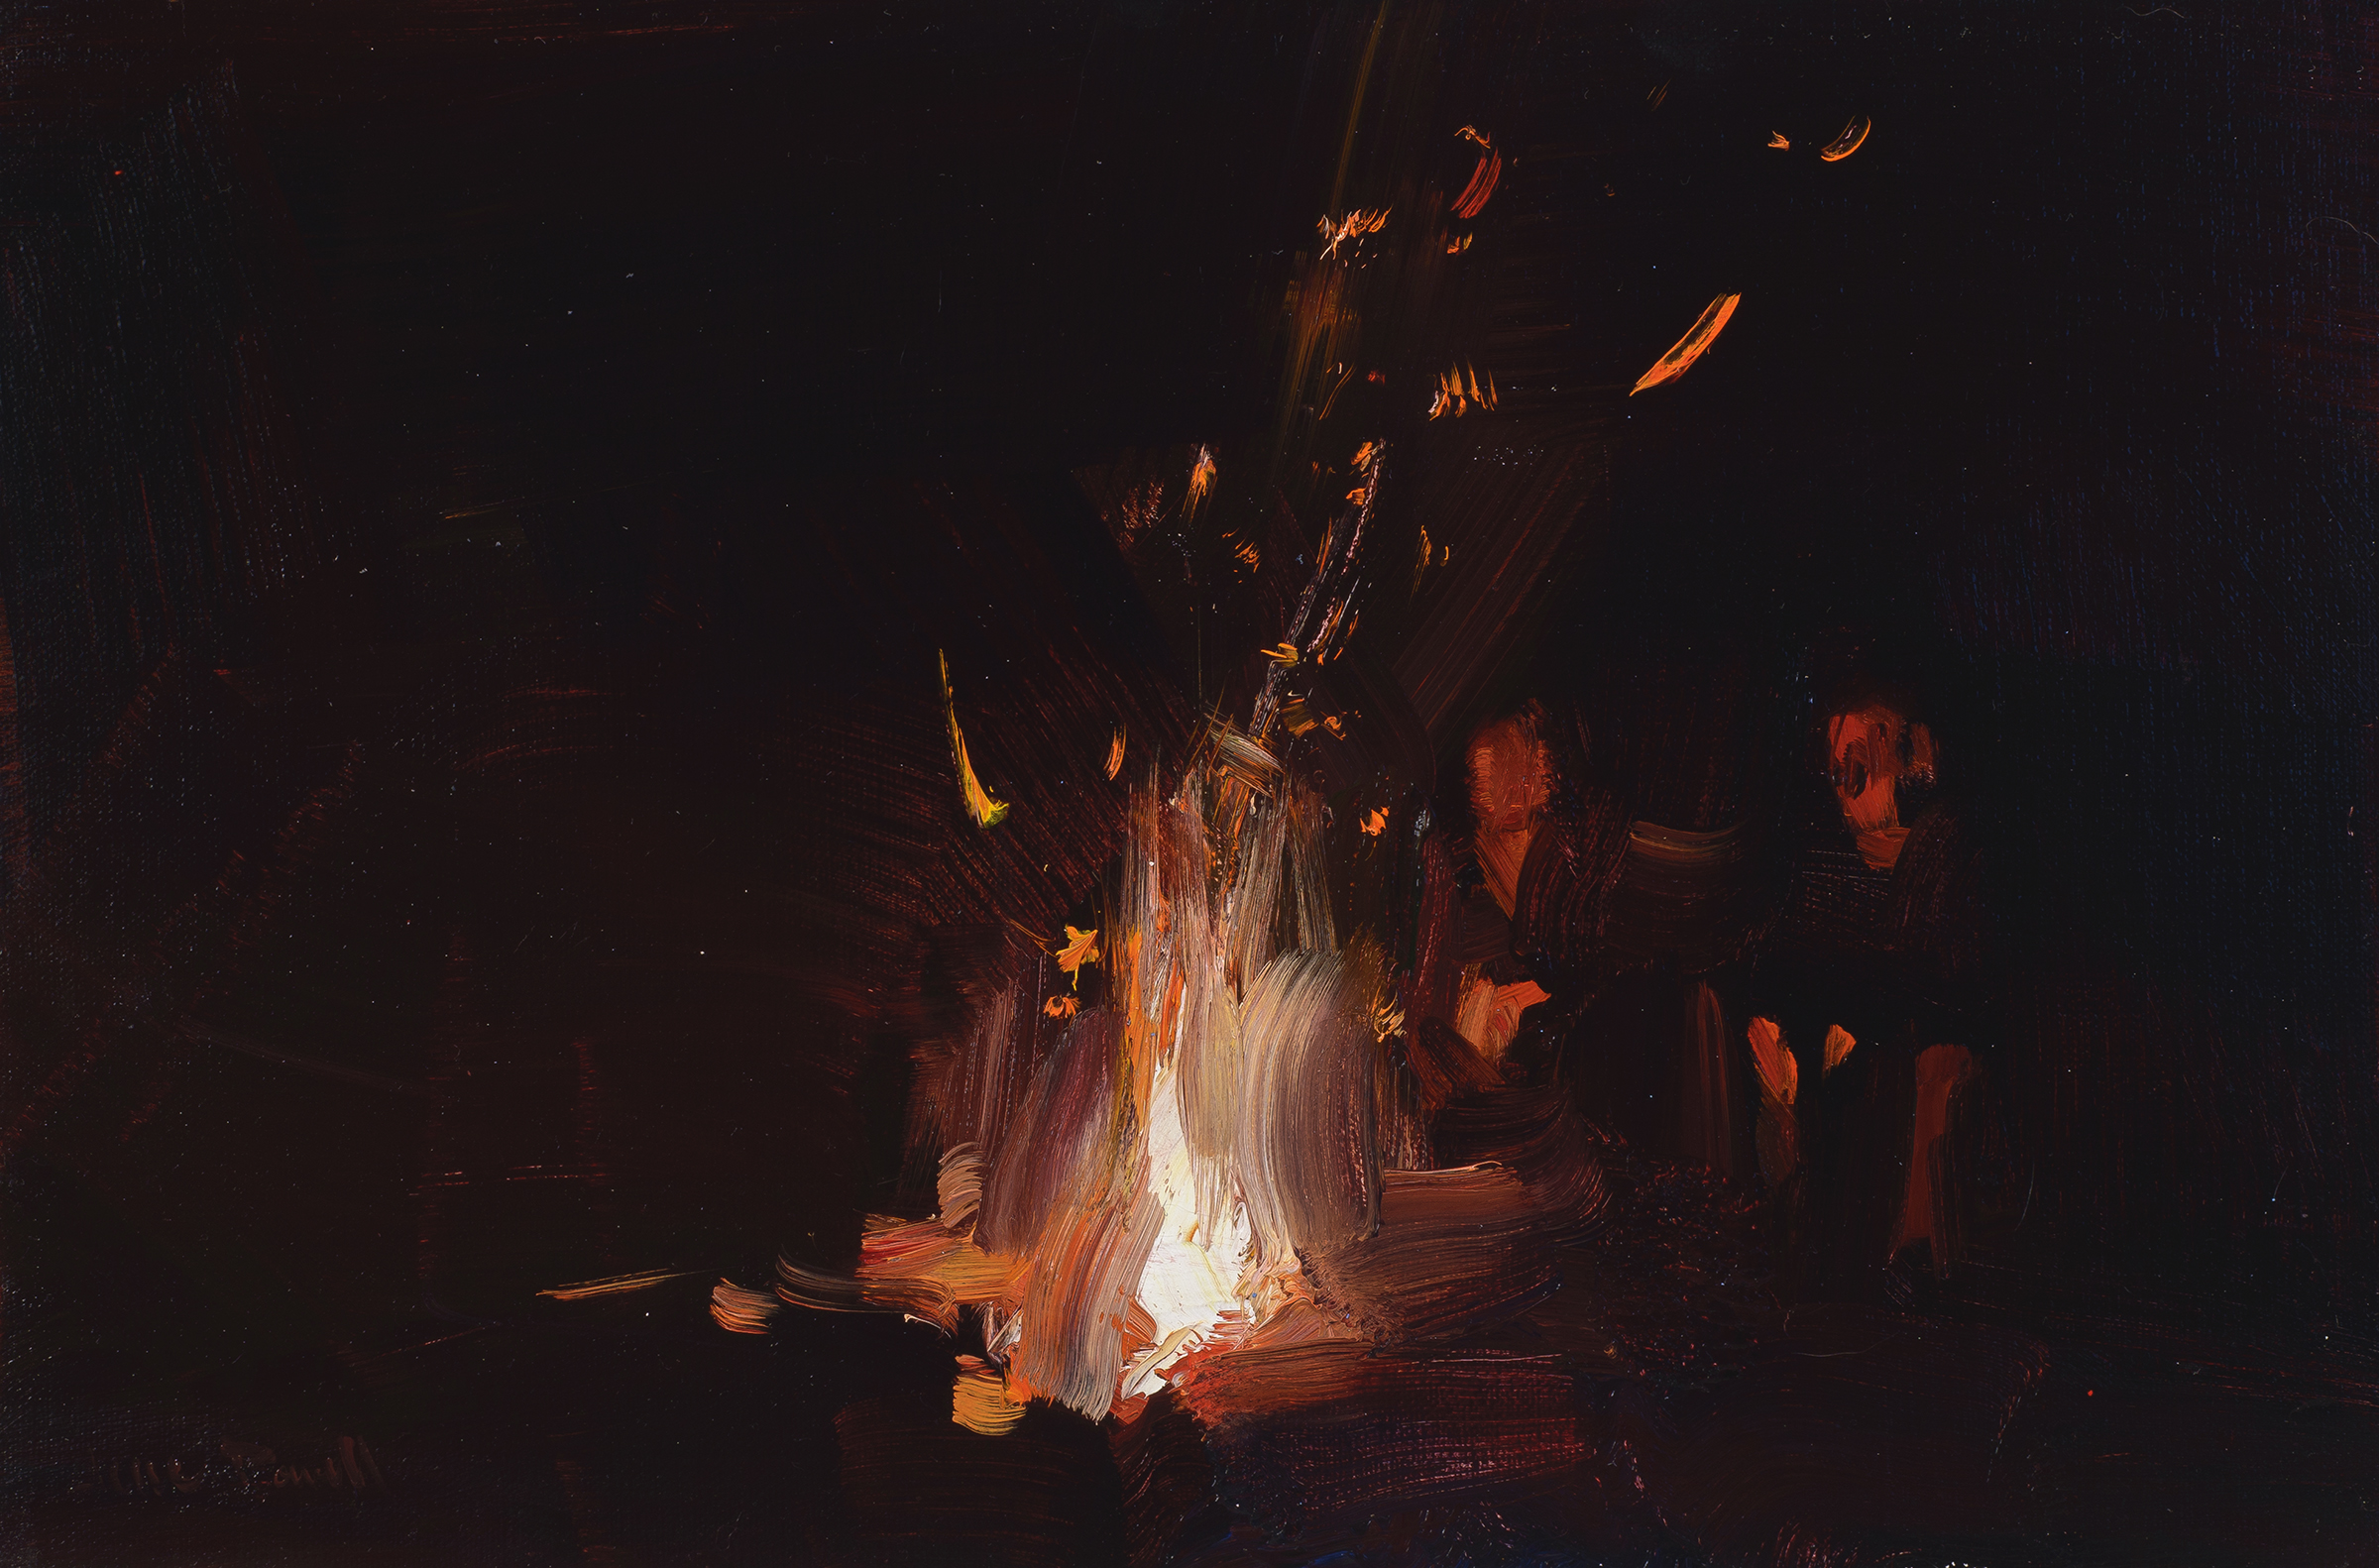  CAMPFIRE STUDY&nbsp; &nbsp; &nbsp; &nbsp; &nbsp; &nbsp; &nbsp; 8x12 inches, oil on linen  